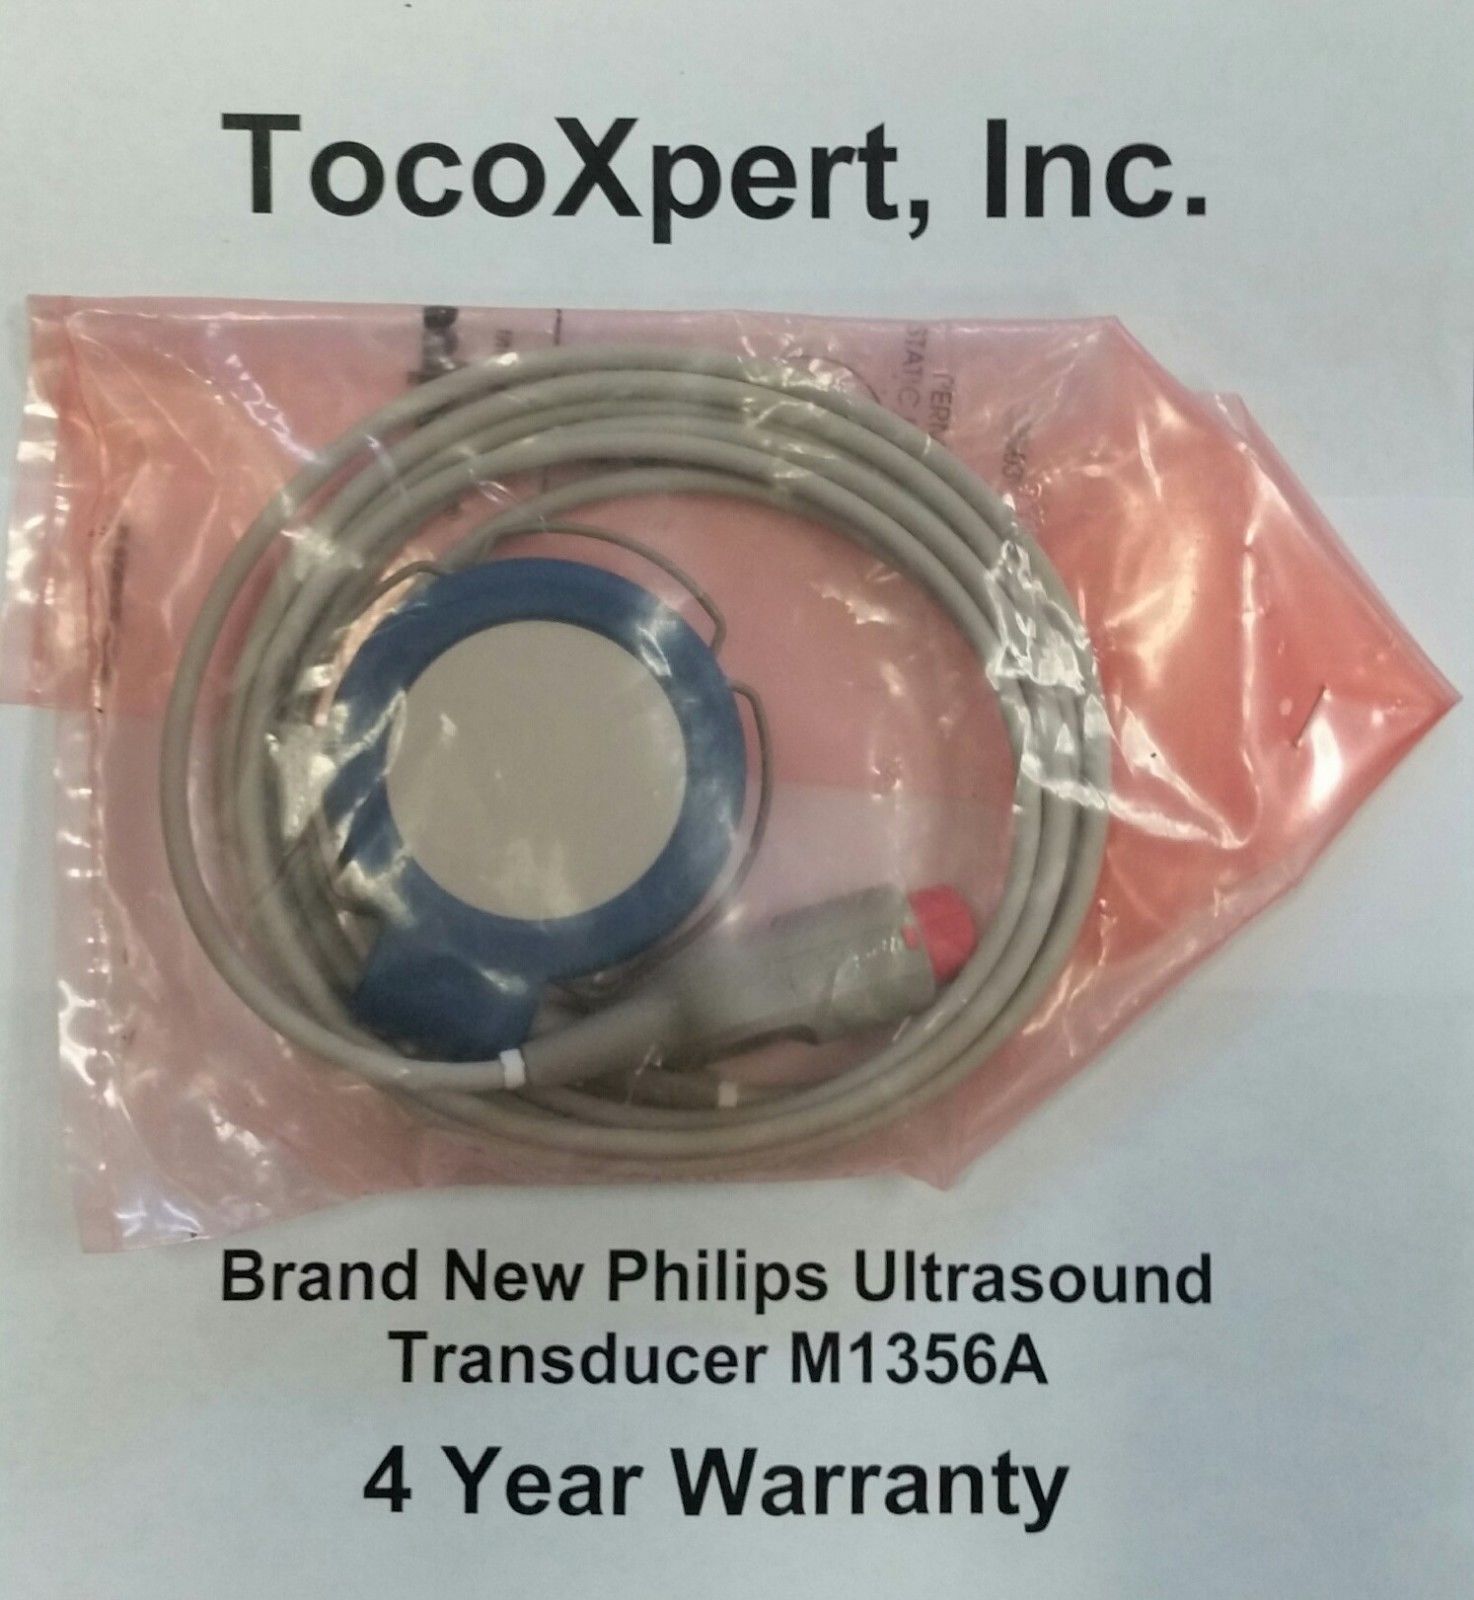  HP Philips Ultrasound M1356A Transducer $429 - BRAND NEW